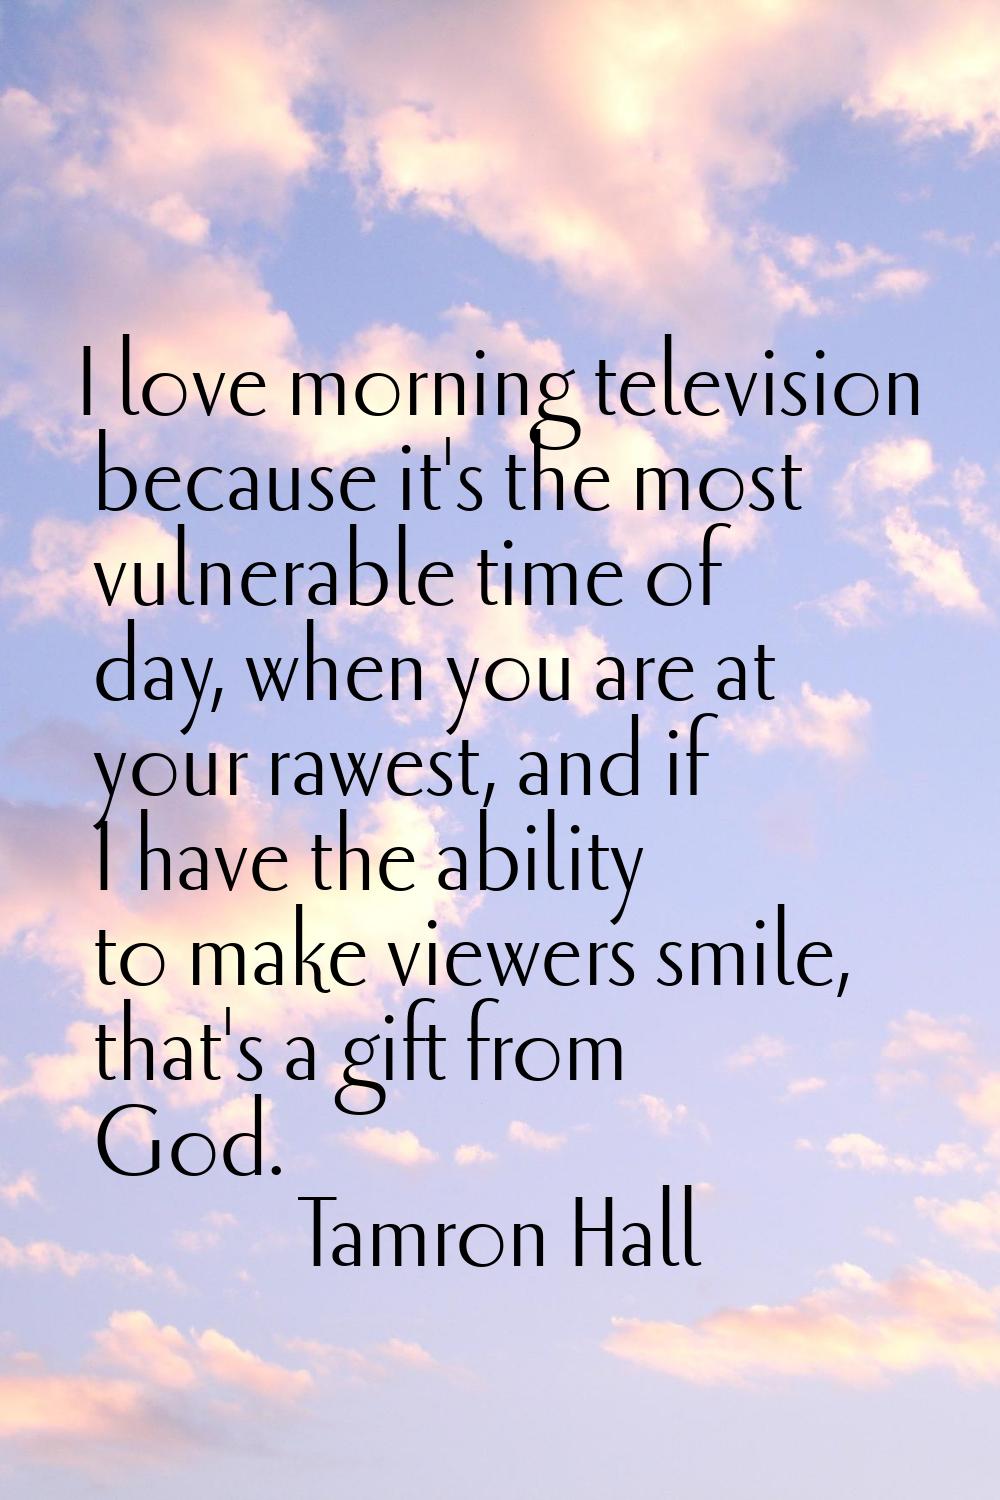 I love morning television because it's the most vulnerable time of day, when you are at your rawest